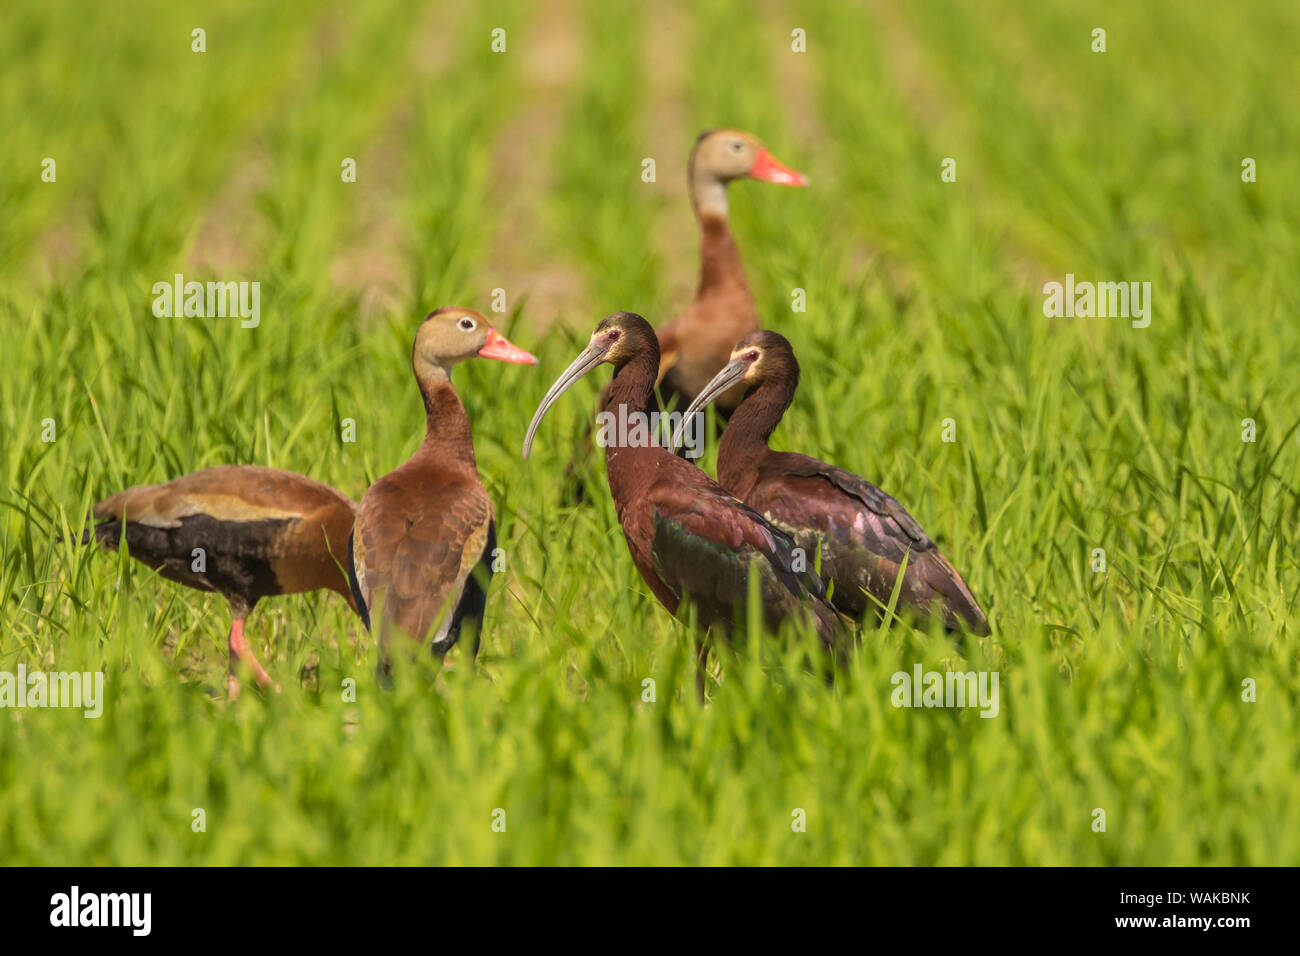 USA, Louisiana, Evangeline Parish. Black-bellied whistling ducks and white-faced ibis in grass. Credit as: Cathy and Gordon Illg / Jaynes Gallery / DanitaDelimont.com Stock Photo